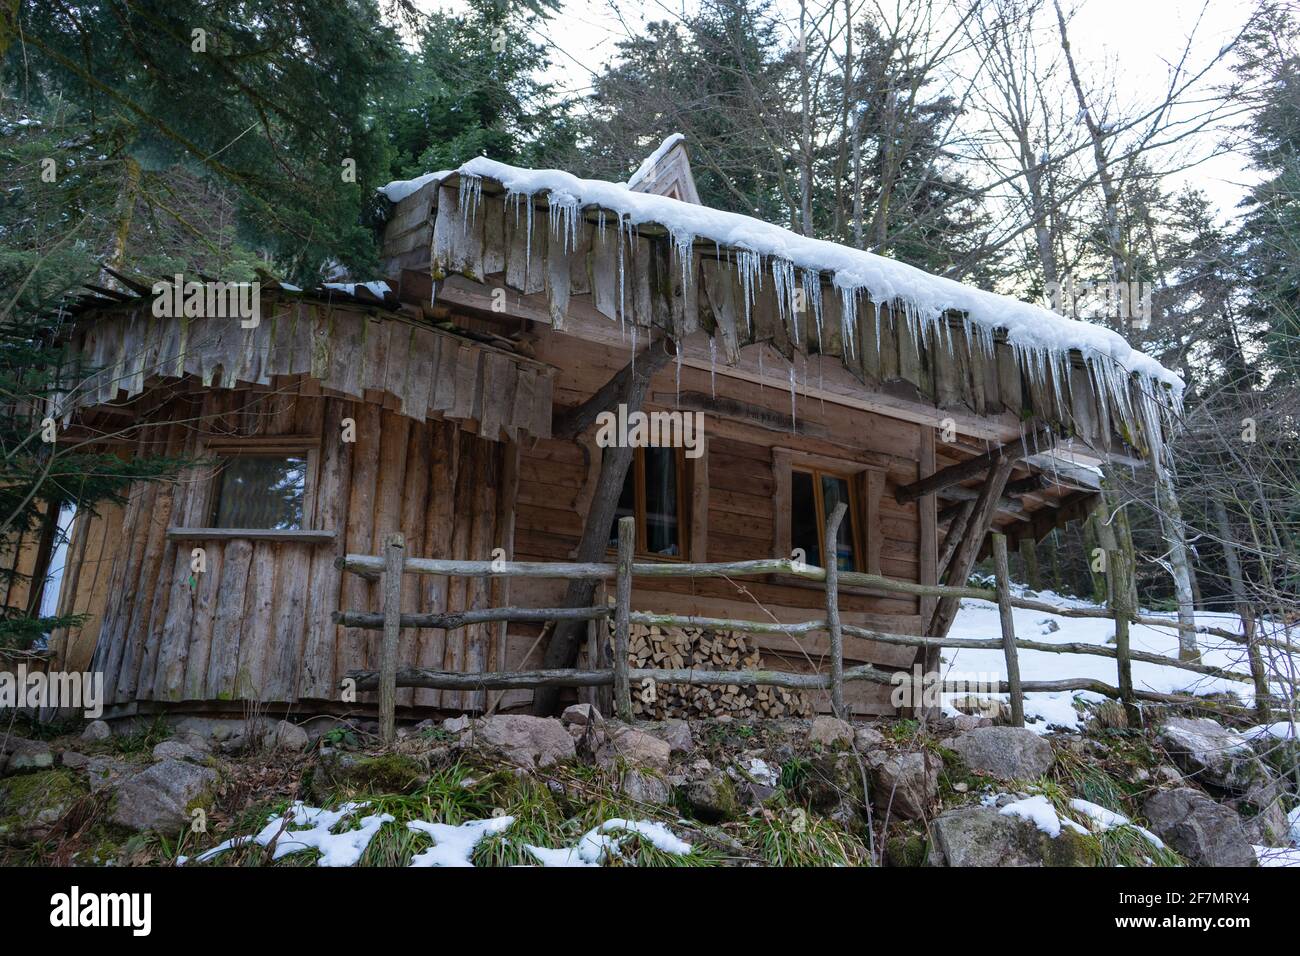 Cottage with stalagtites hanging from the roof. Stock Photo